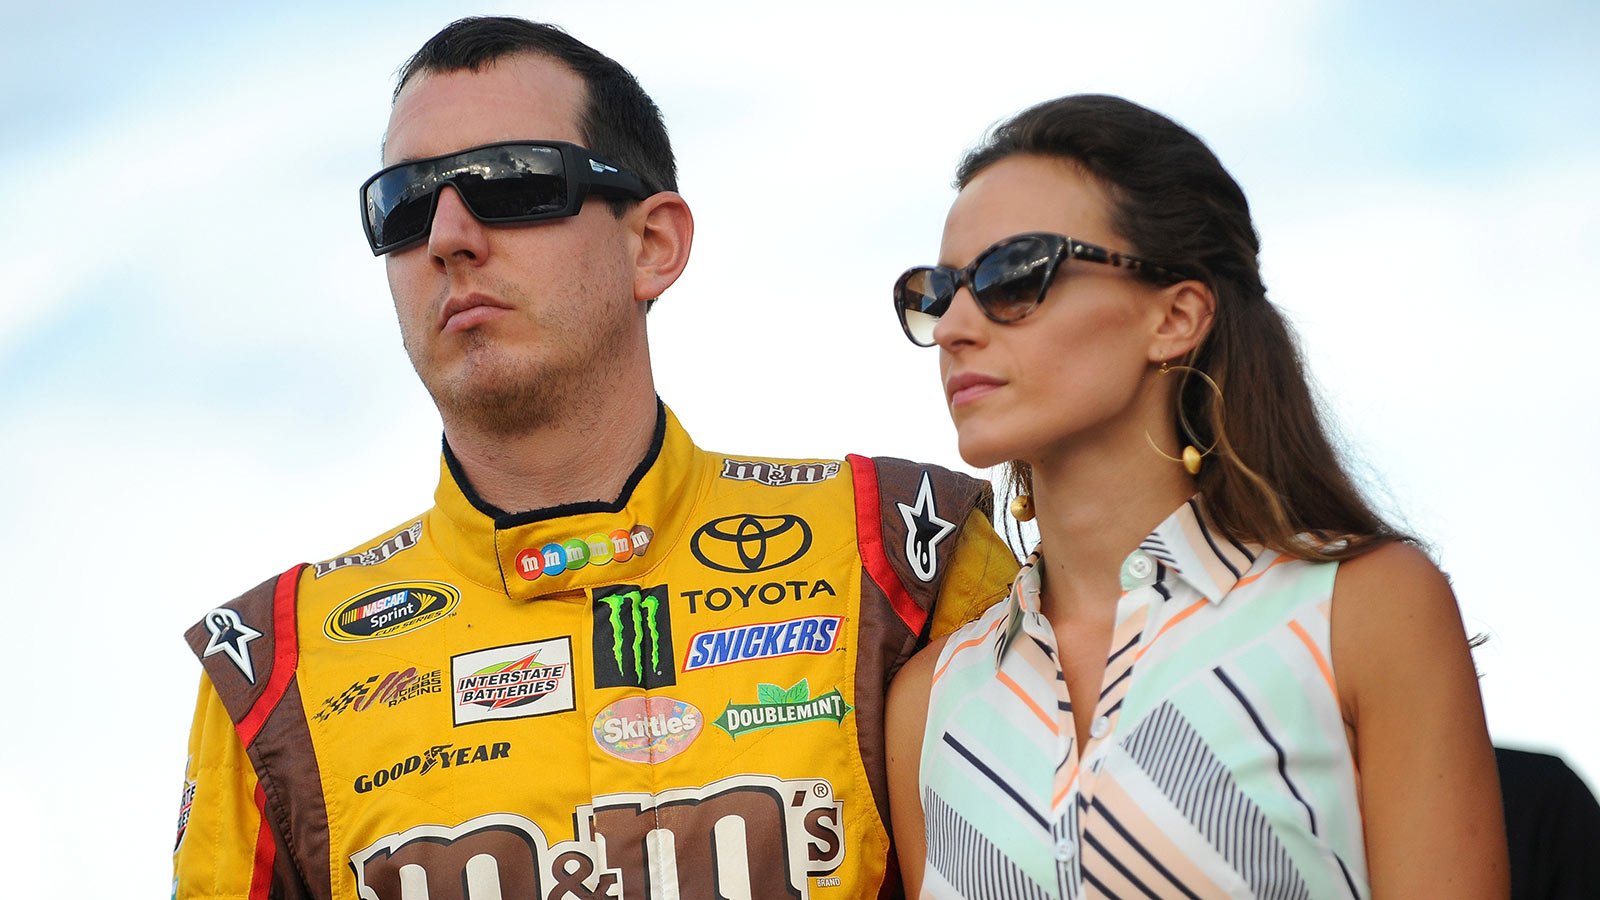 Beaming bridesmaid: Kyle Busch pleased to finish second